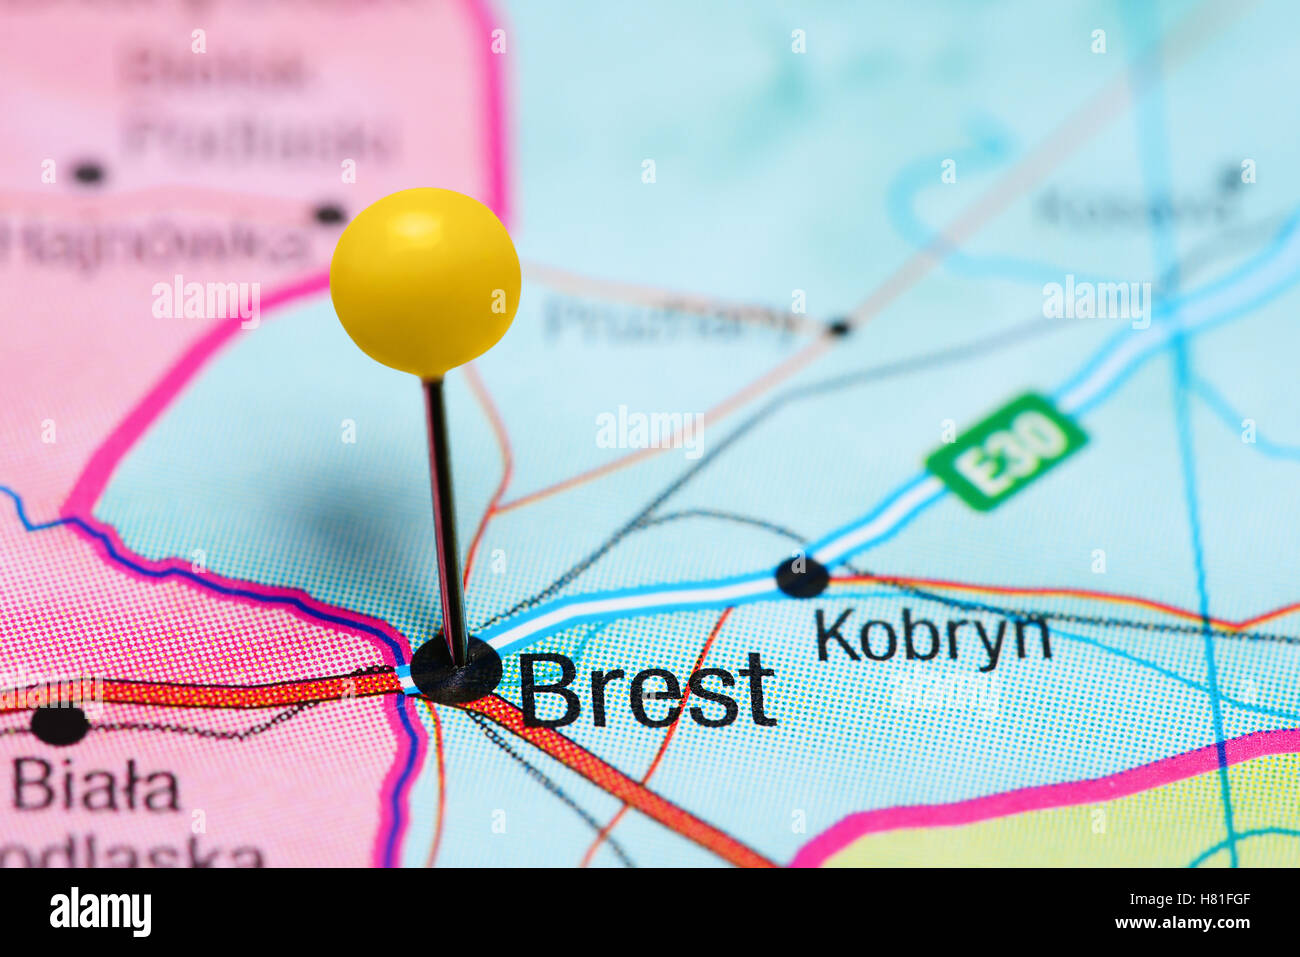 Brest pinned on a map of Belarus Stock Photo